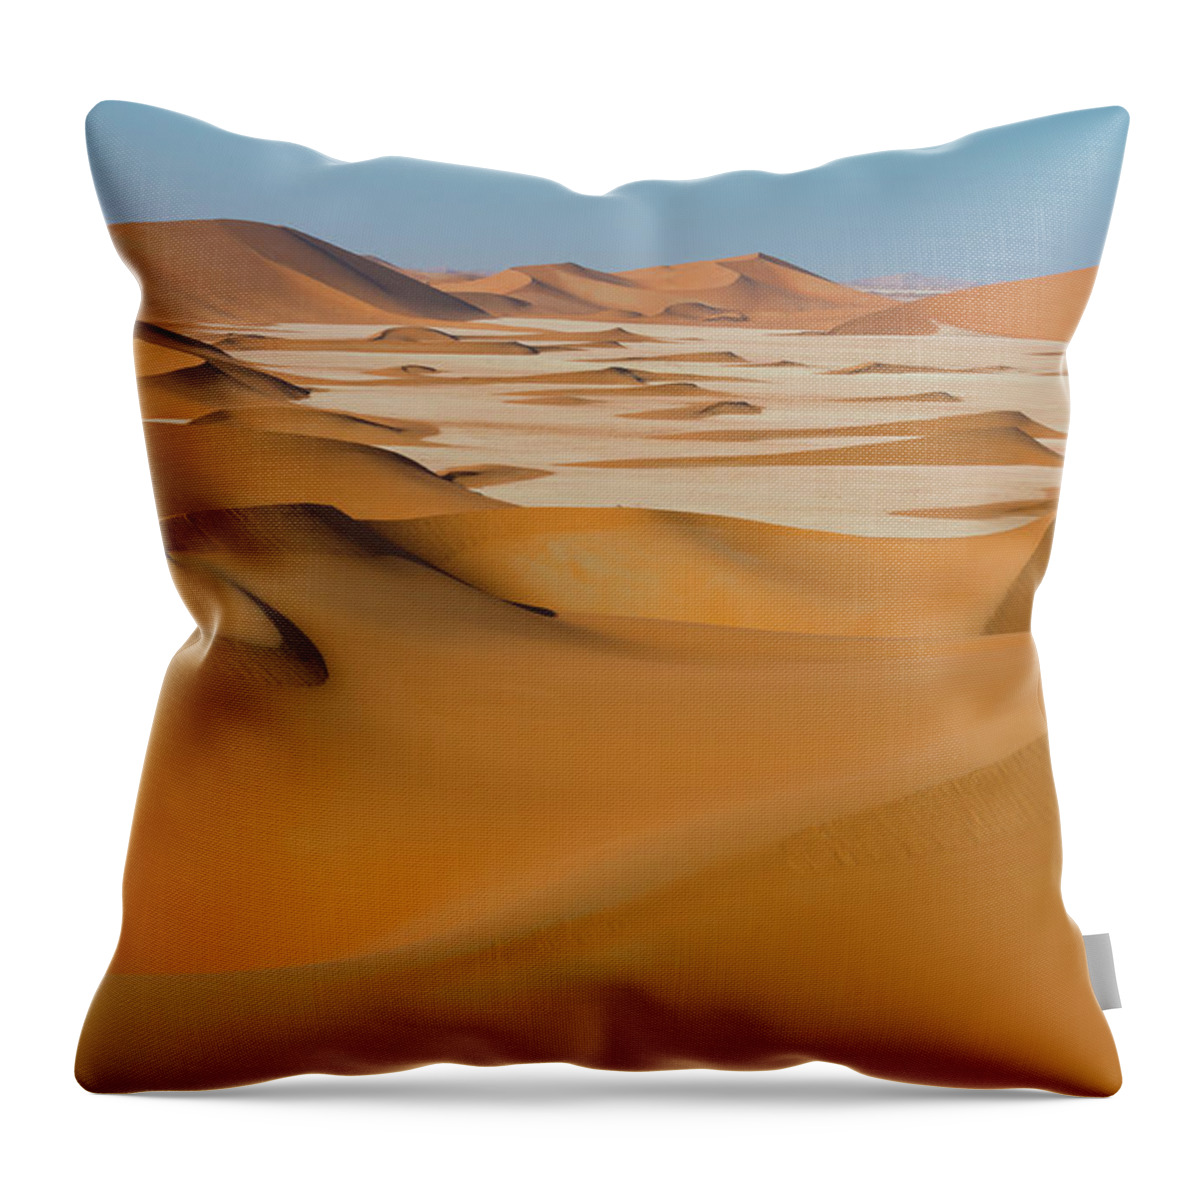 Tranquility Throw Pillow featuring the photograph Rub Al-khali Empty Quarter #1 by All Rights Reserved For Ahmed Al-shukaili